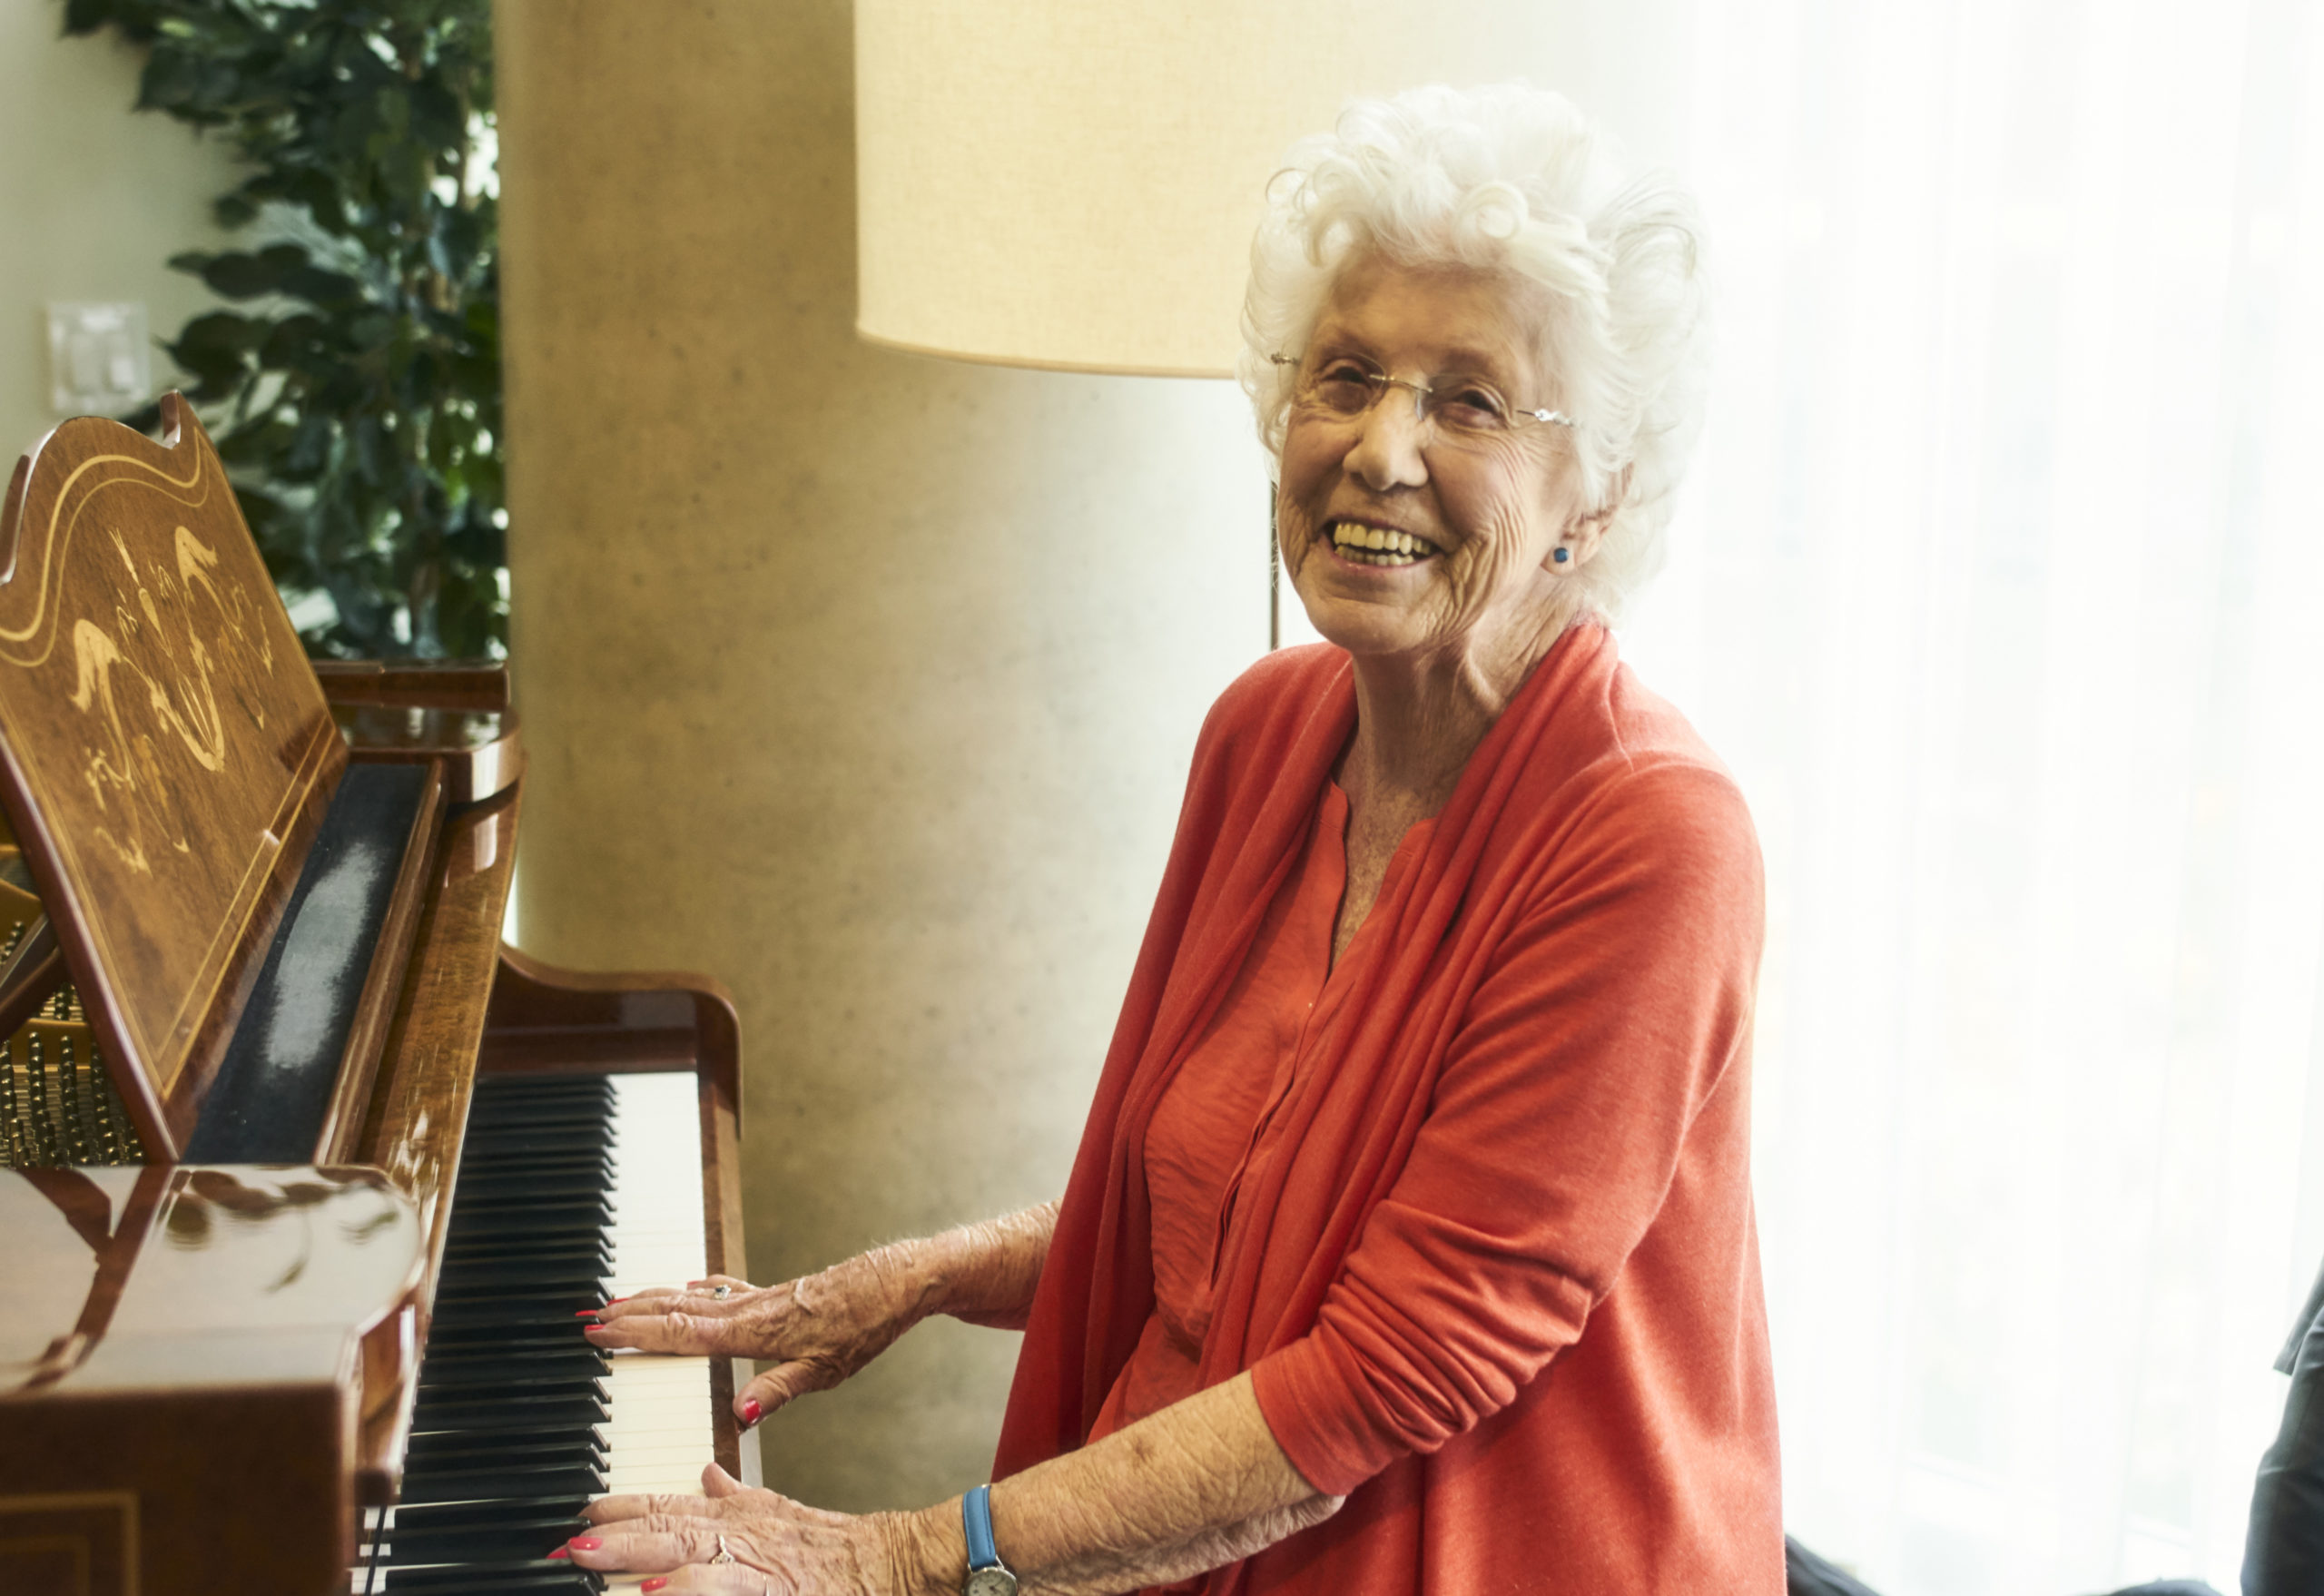 Westerleigh PARC resident Dorothy smiling and playing the piano